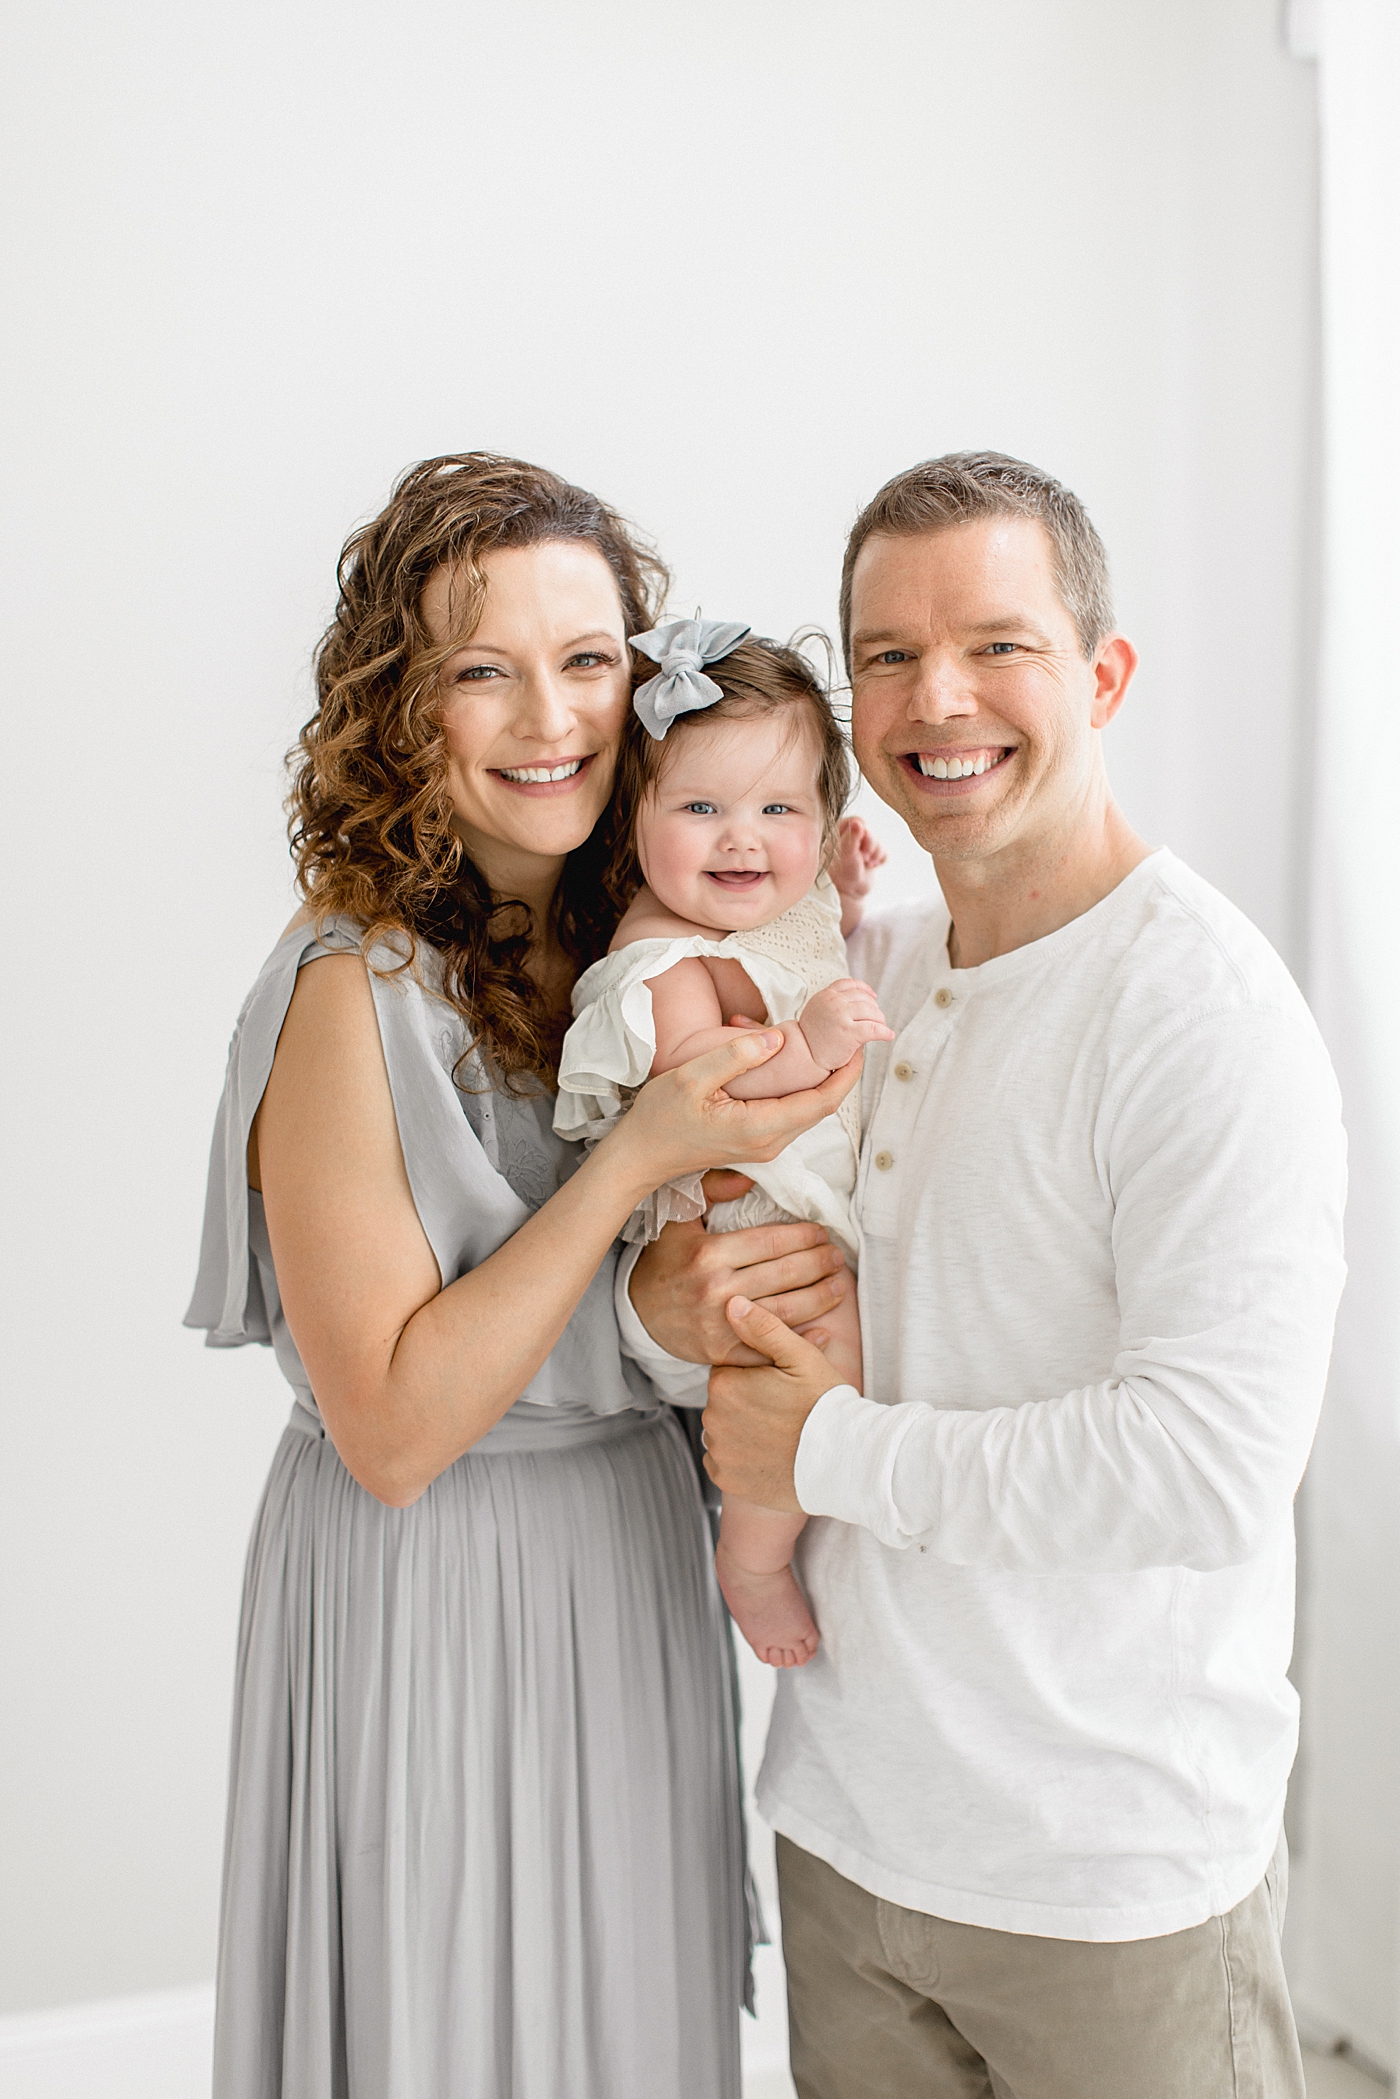 Family portrait in Tampa photography studio. Photo by Brittany Elise Photography.